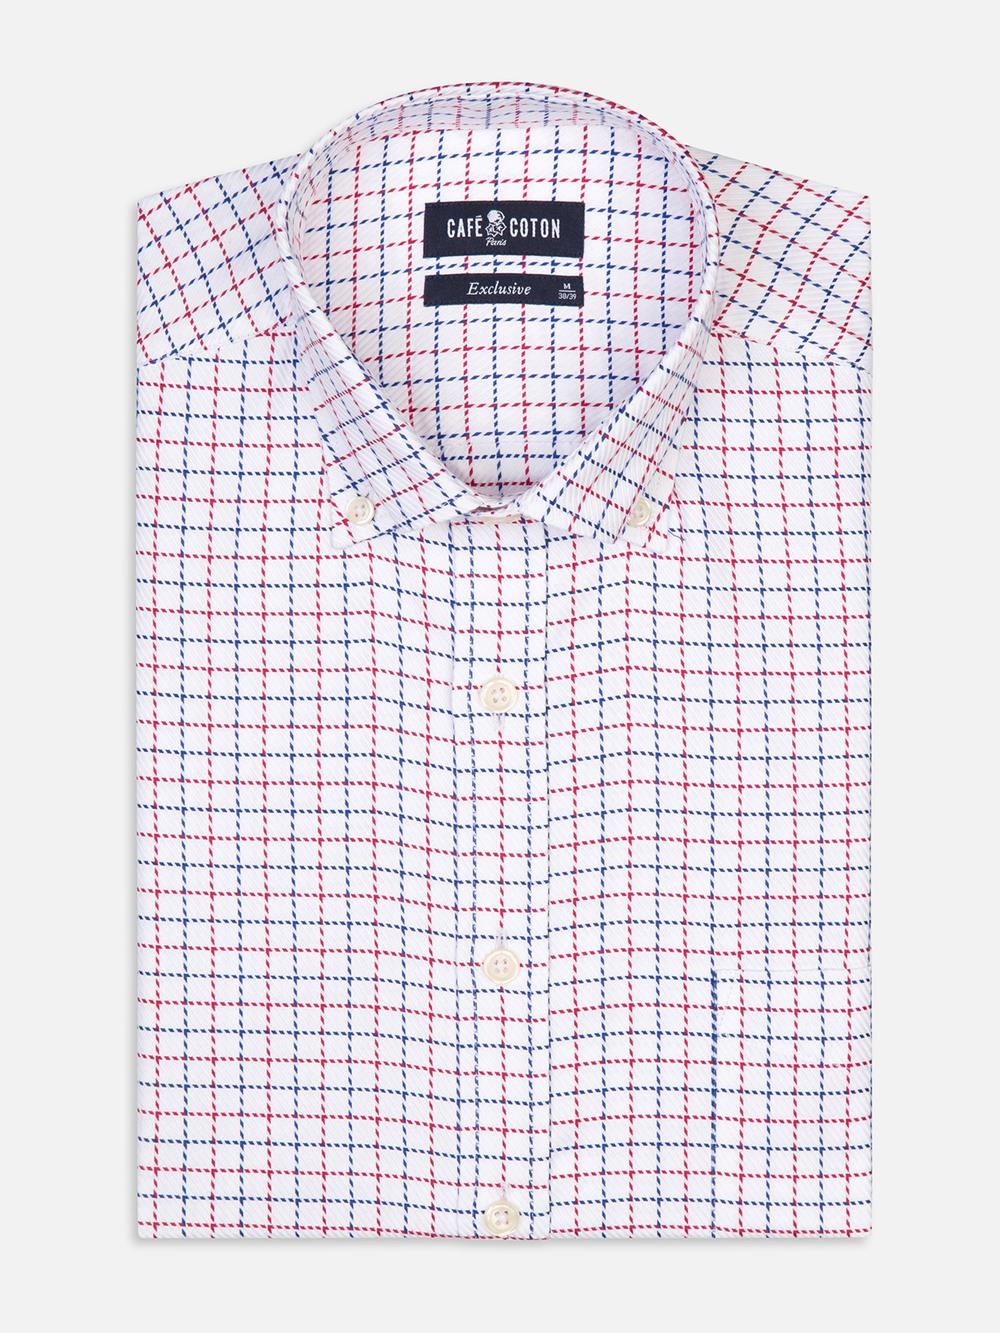 Sean navy blue and red checked shirt - Button-down collar